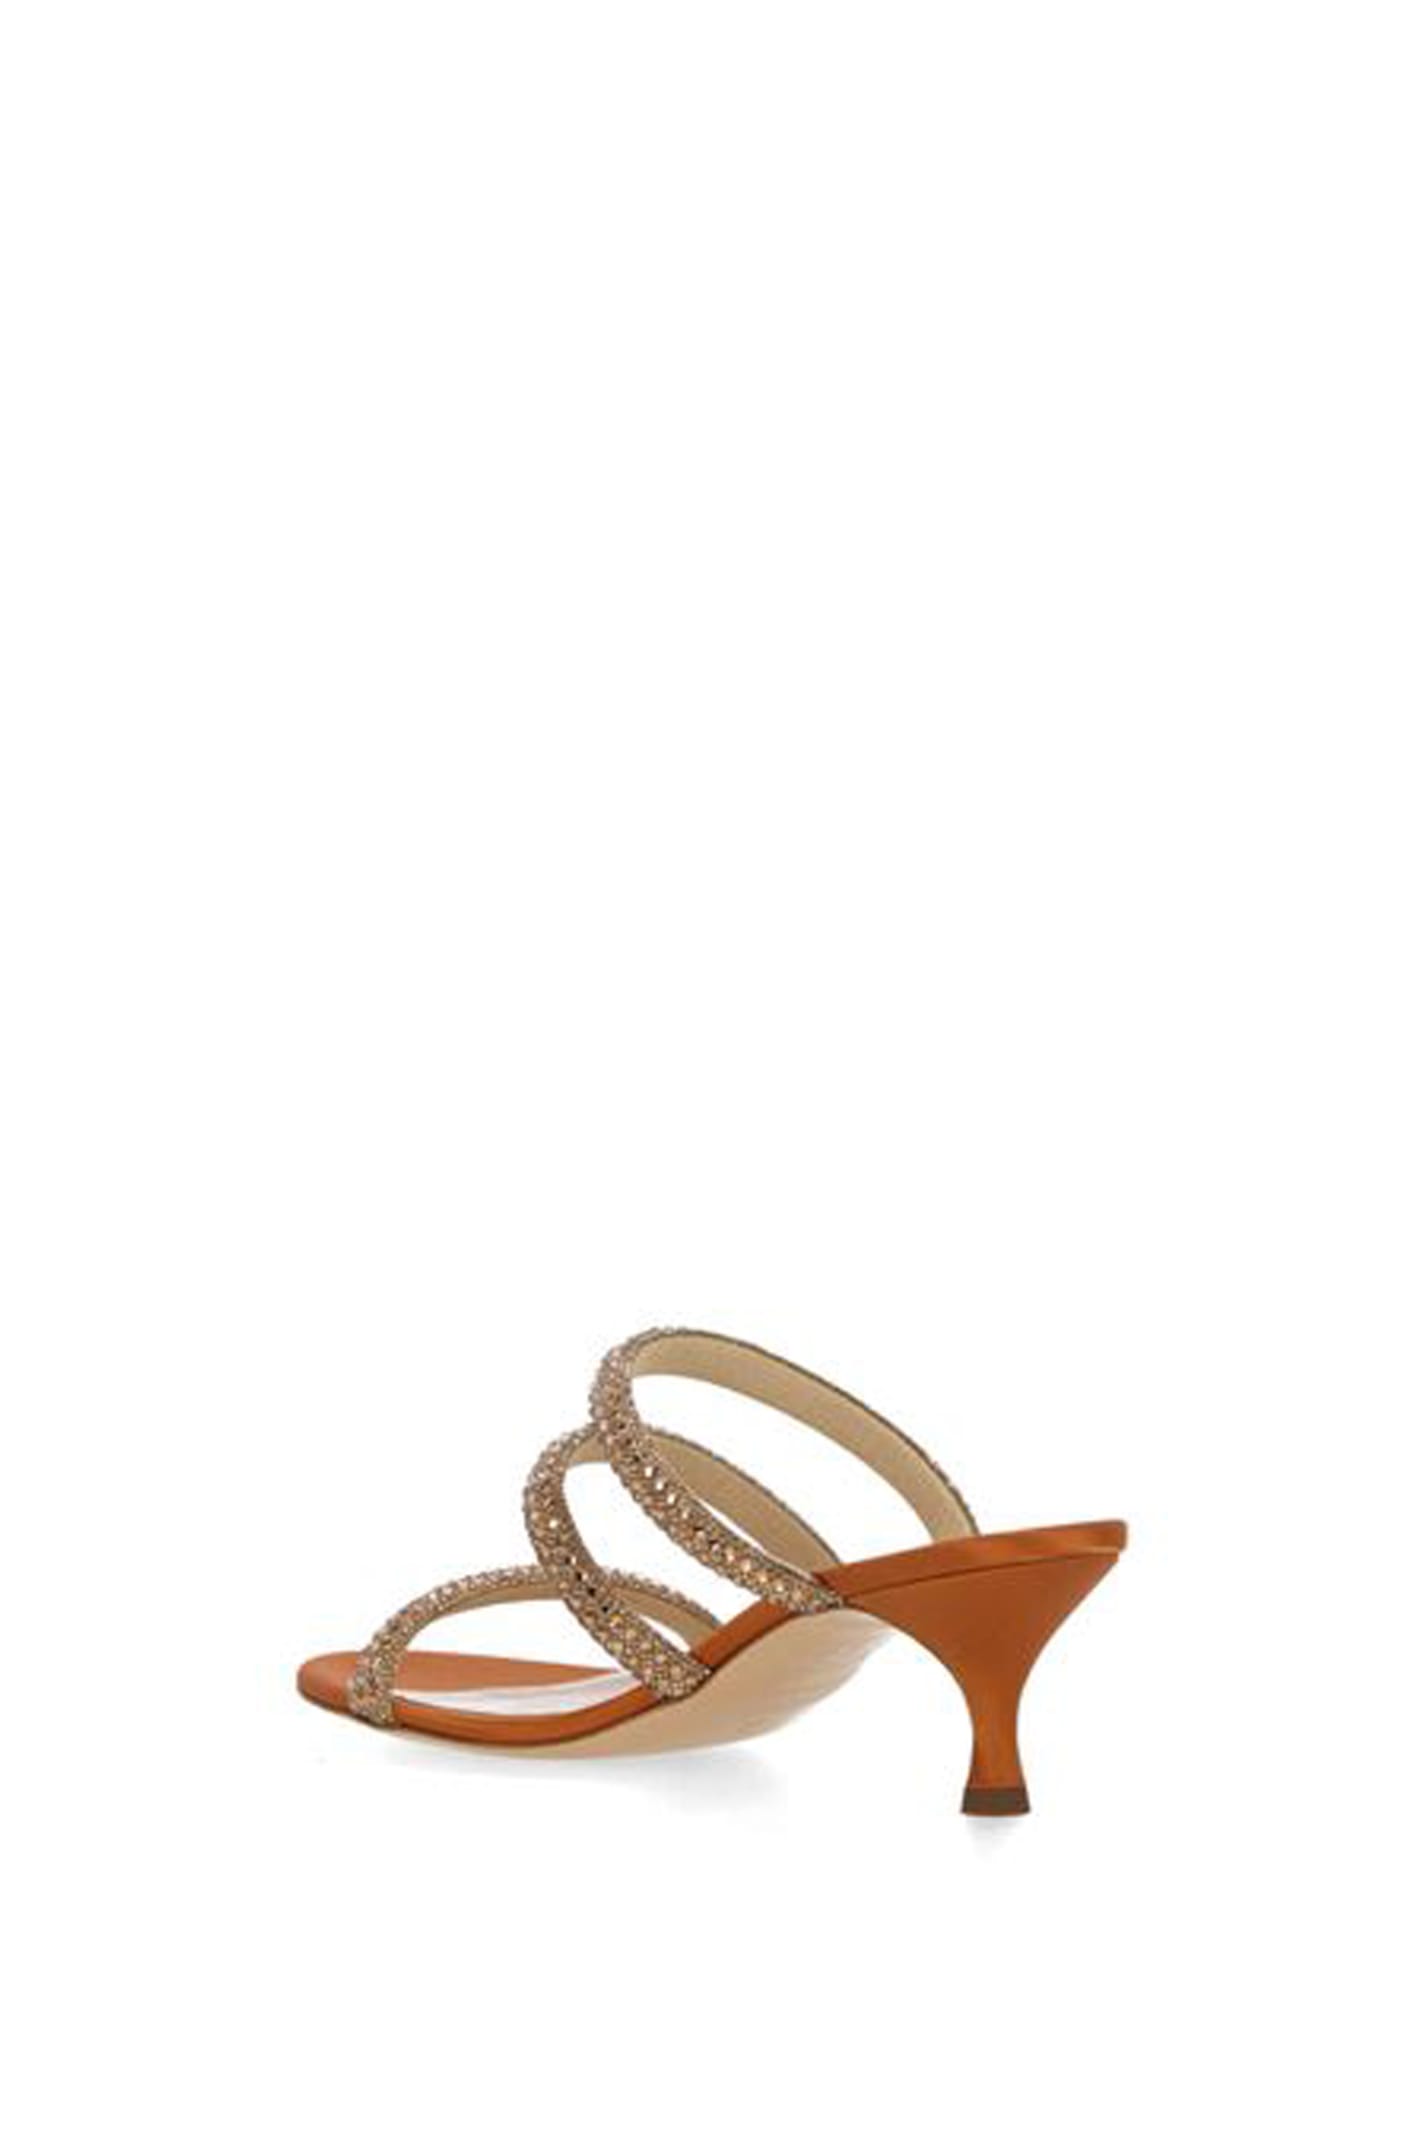 Shop Casadei Shoes With Heels In Golden